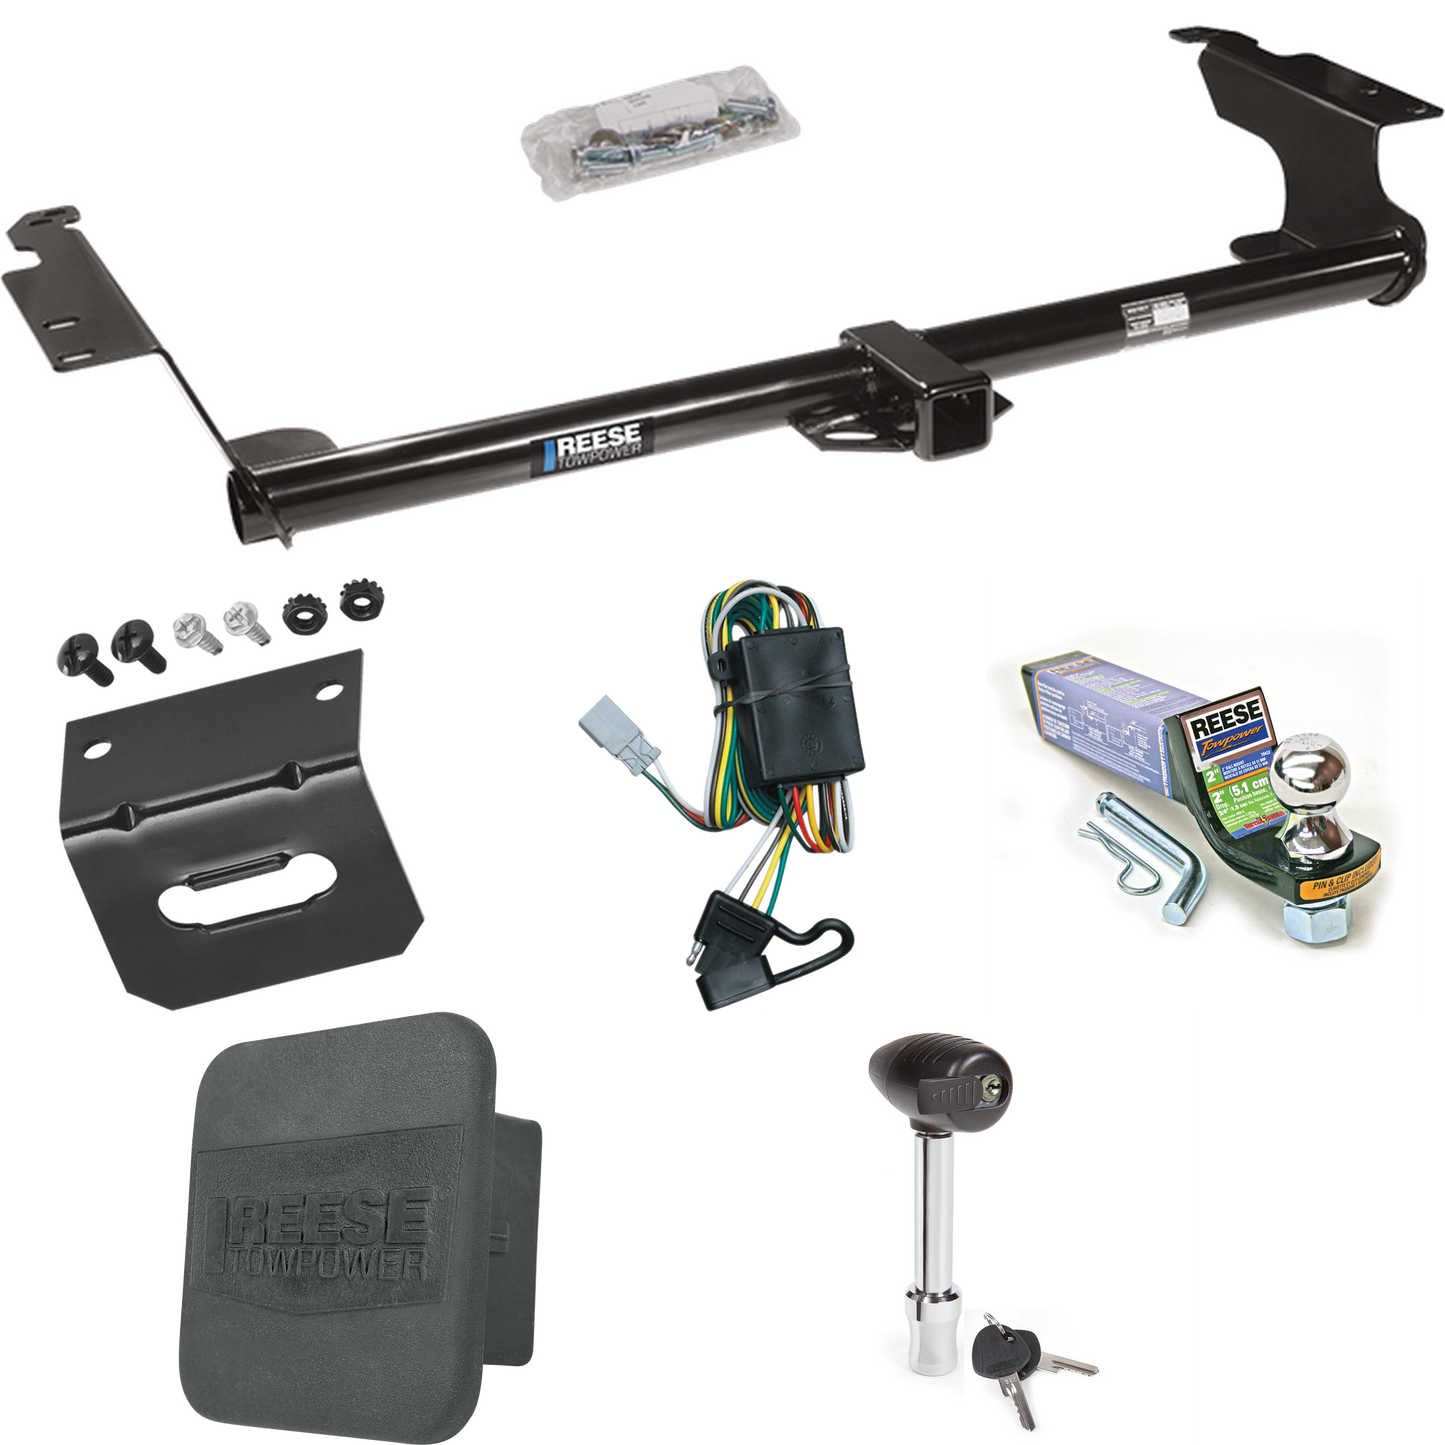 Fits 1999-2004 Honda Odyssey Trailer Hitch Tow PKG w/ 4-Flat Wiring + Starter Kit Ball Mount w/ 2" Drop & 1-7/8" Ball + Wiring Bracket + Hitch Lock + Hitch Cover By Reese Towpower